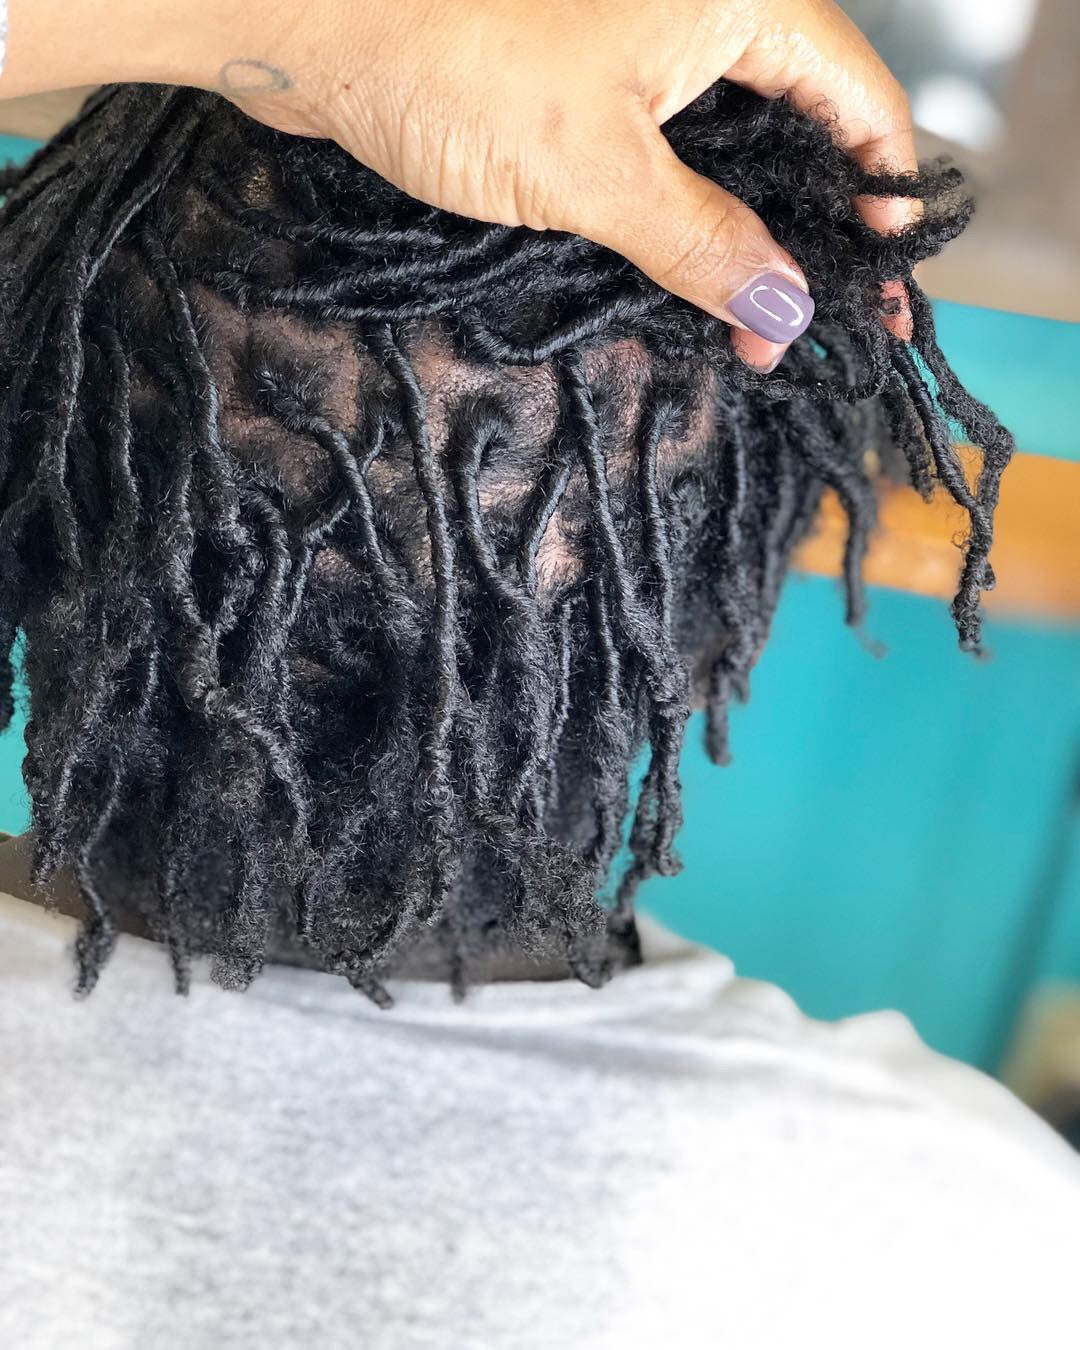 What Can I Use to Moisturize my Locs?